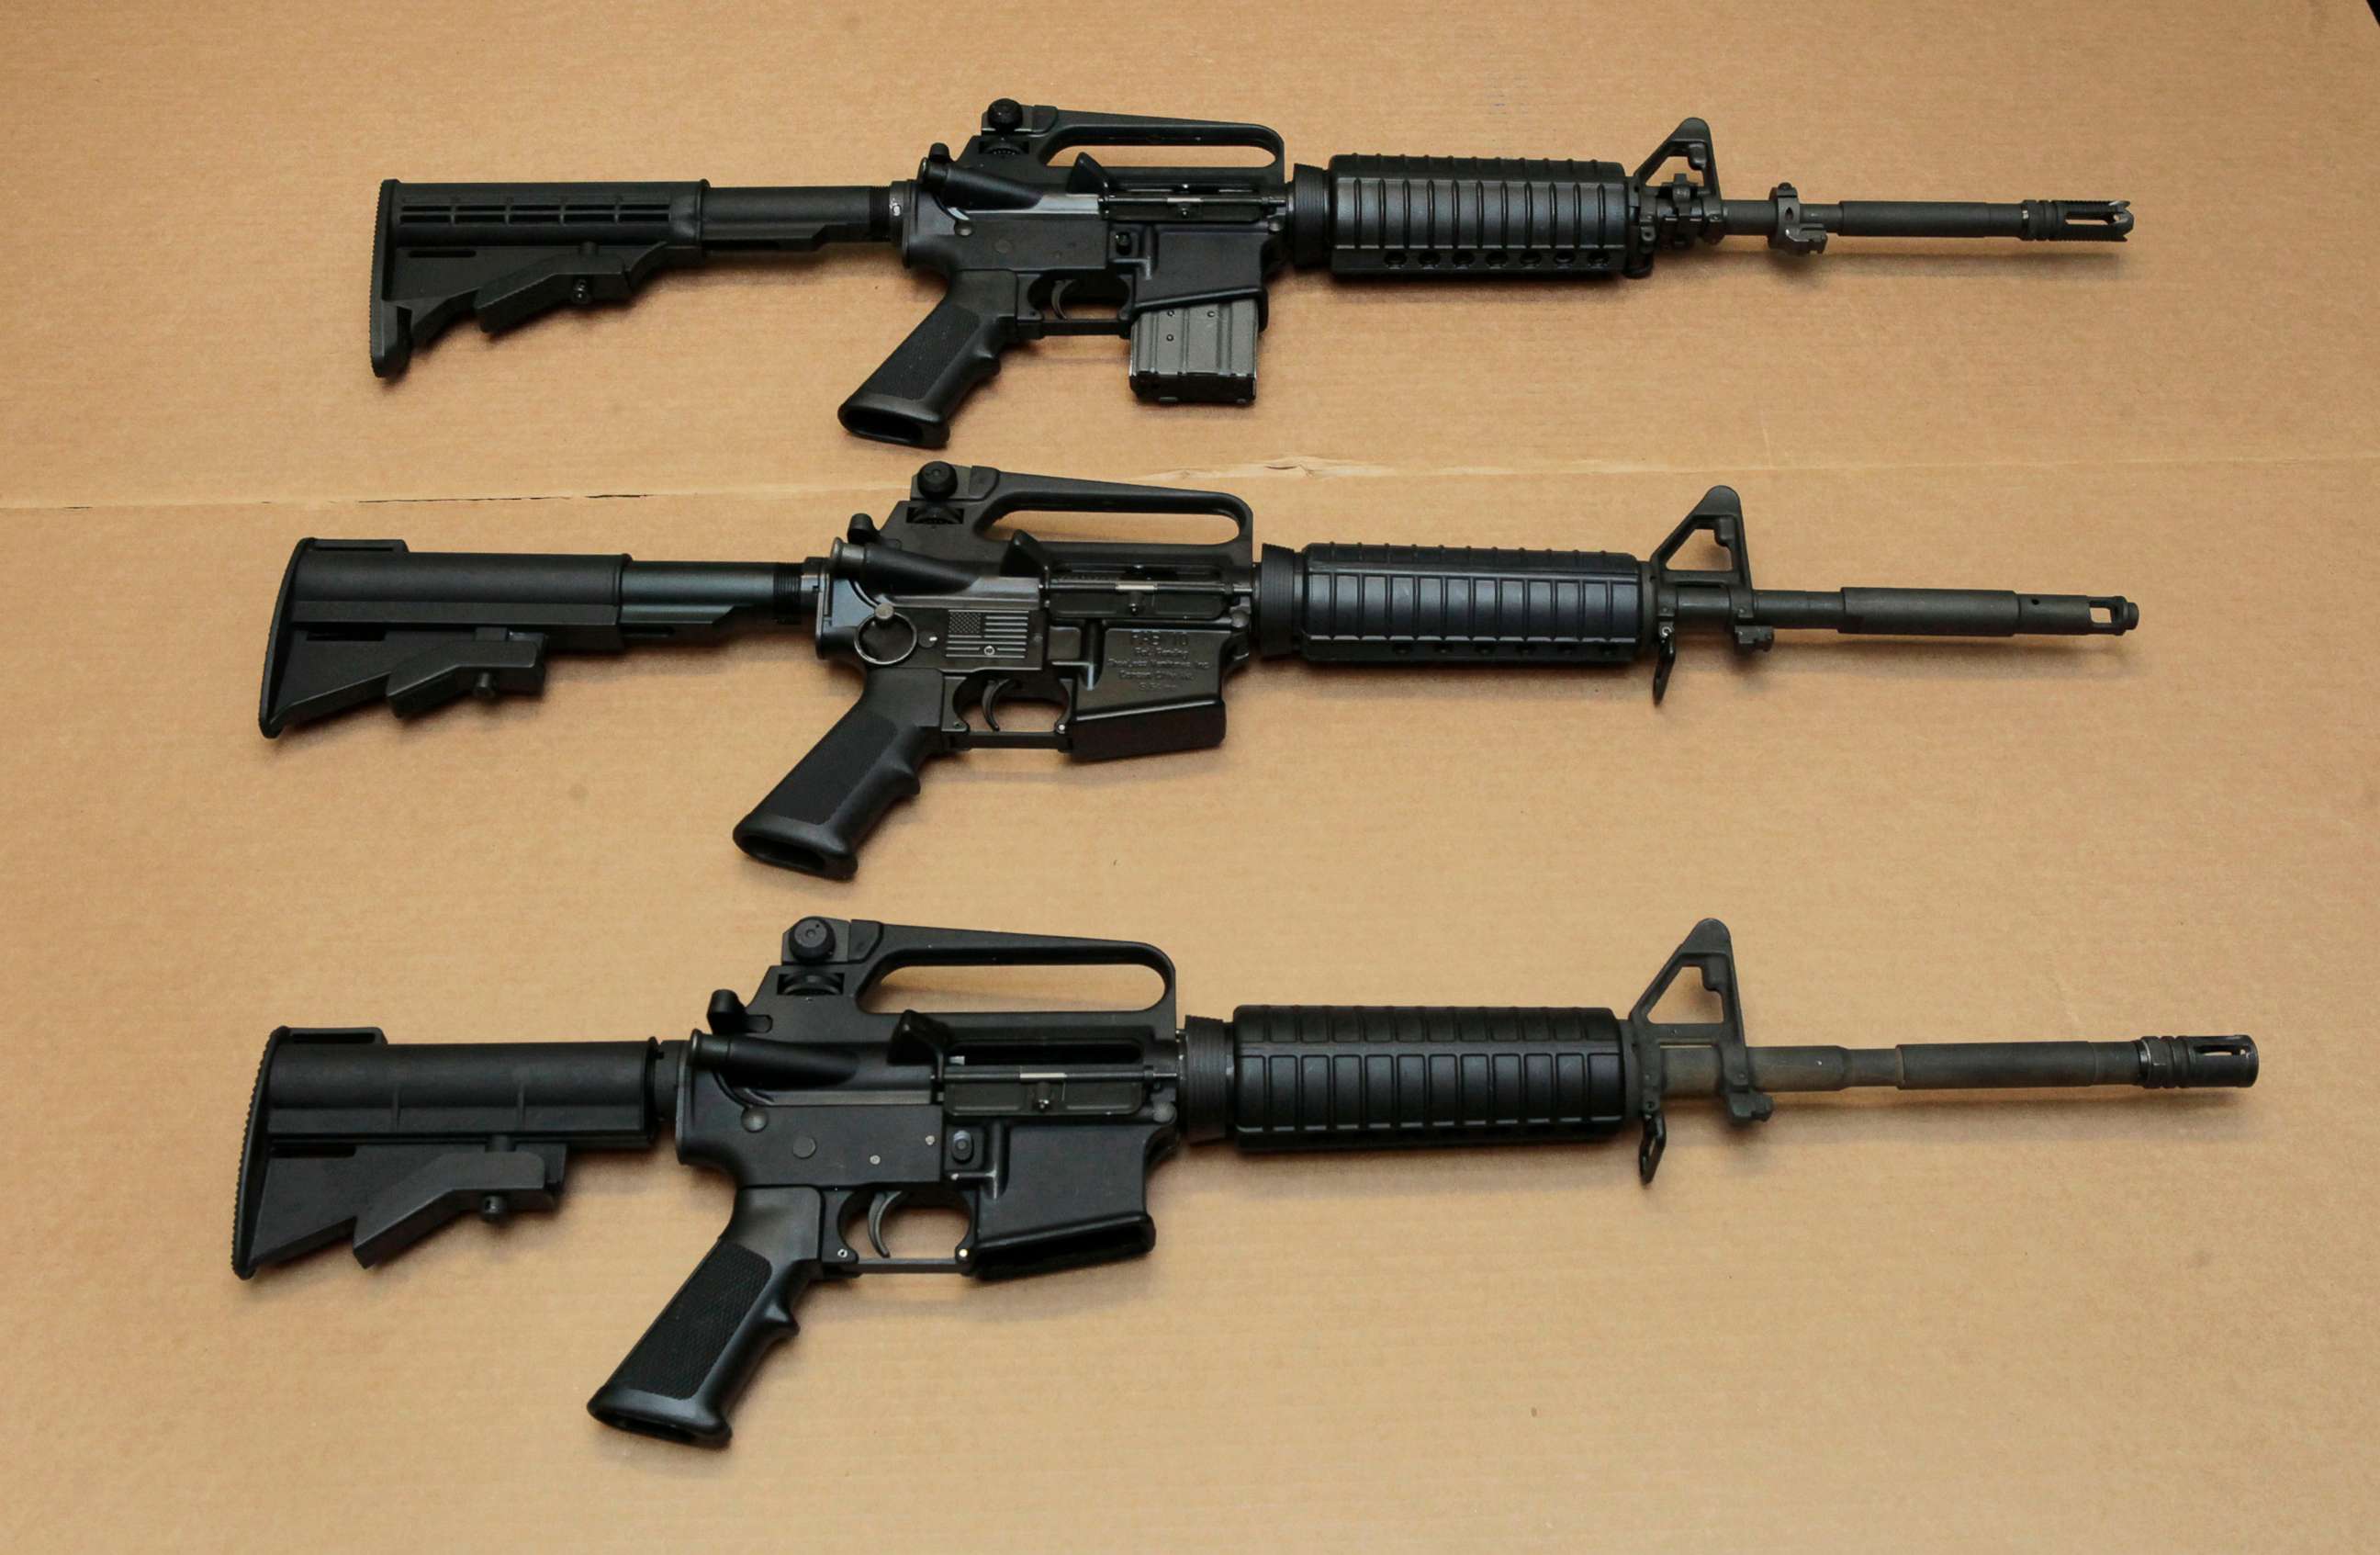 PHOTO: In this Aug. 15, 2012 file photo three variations of the AR-15 assault rifle are displayed at the California Department of Justice in Sacramento, Calif.